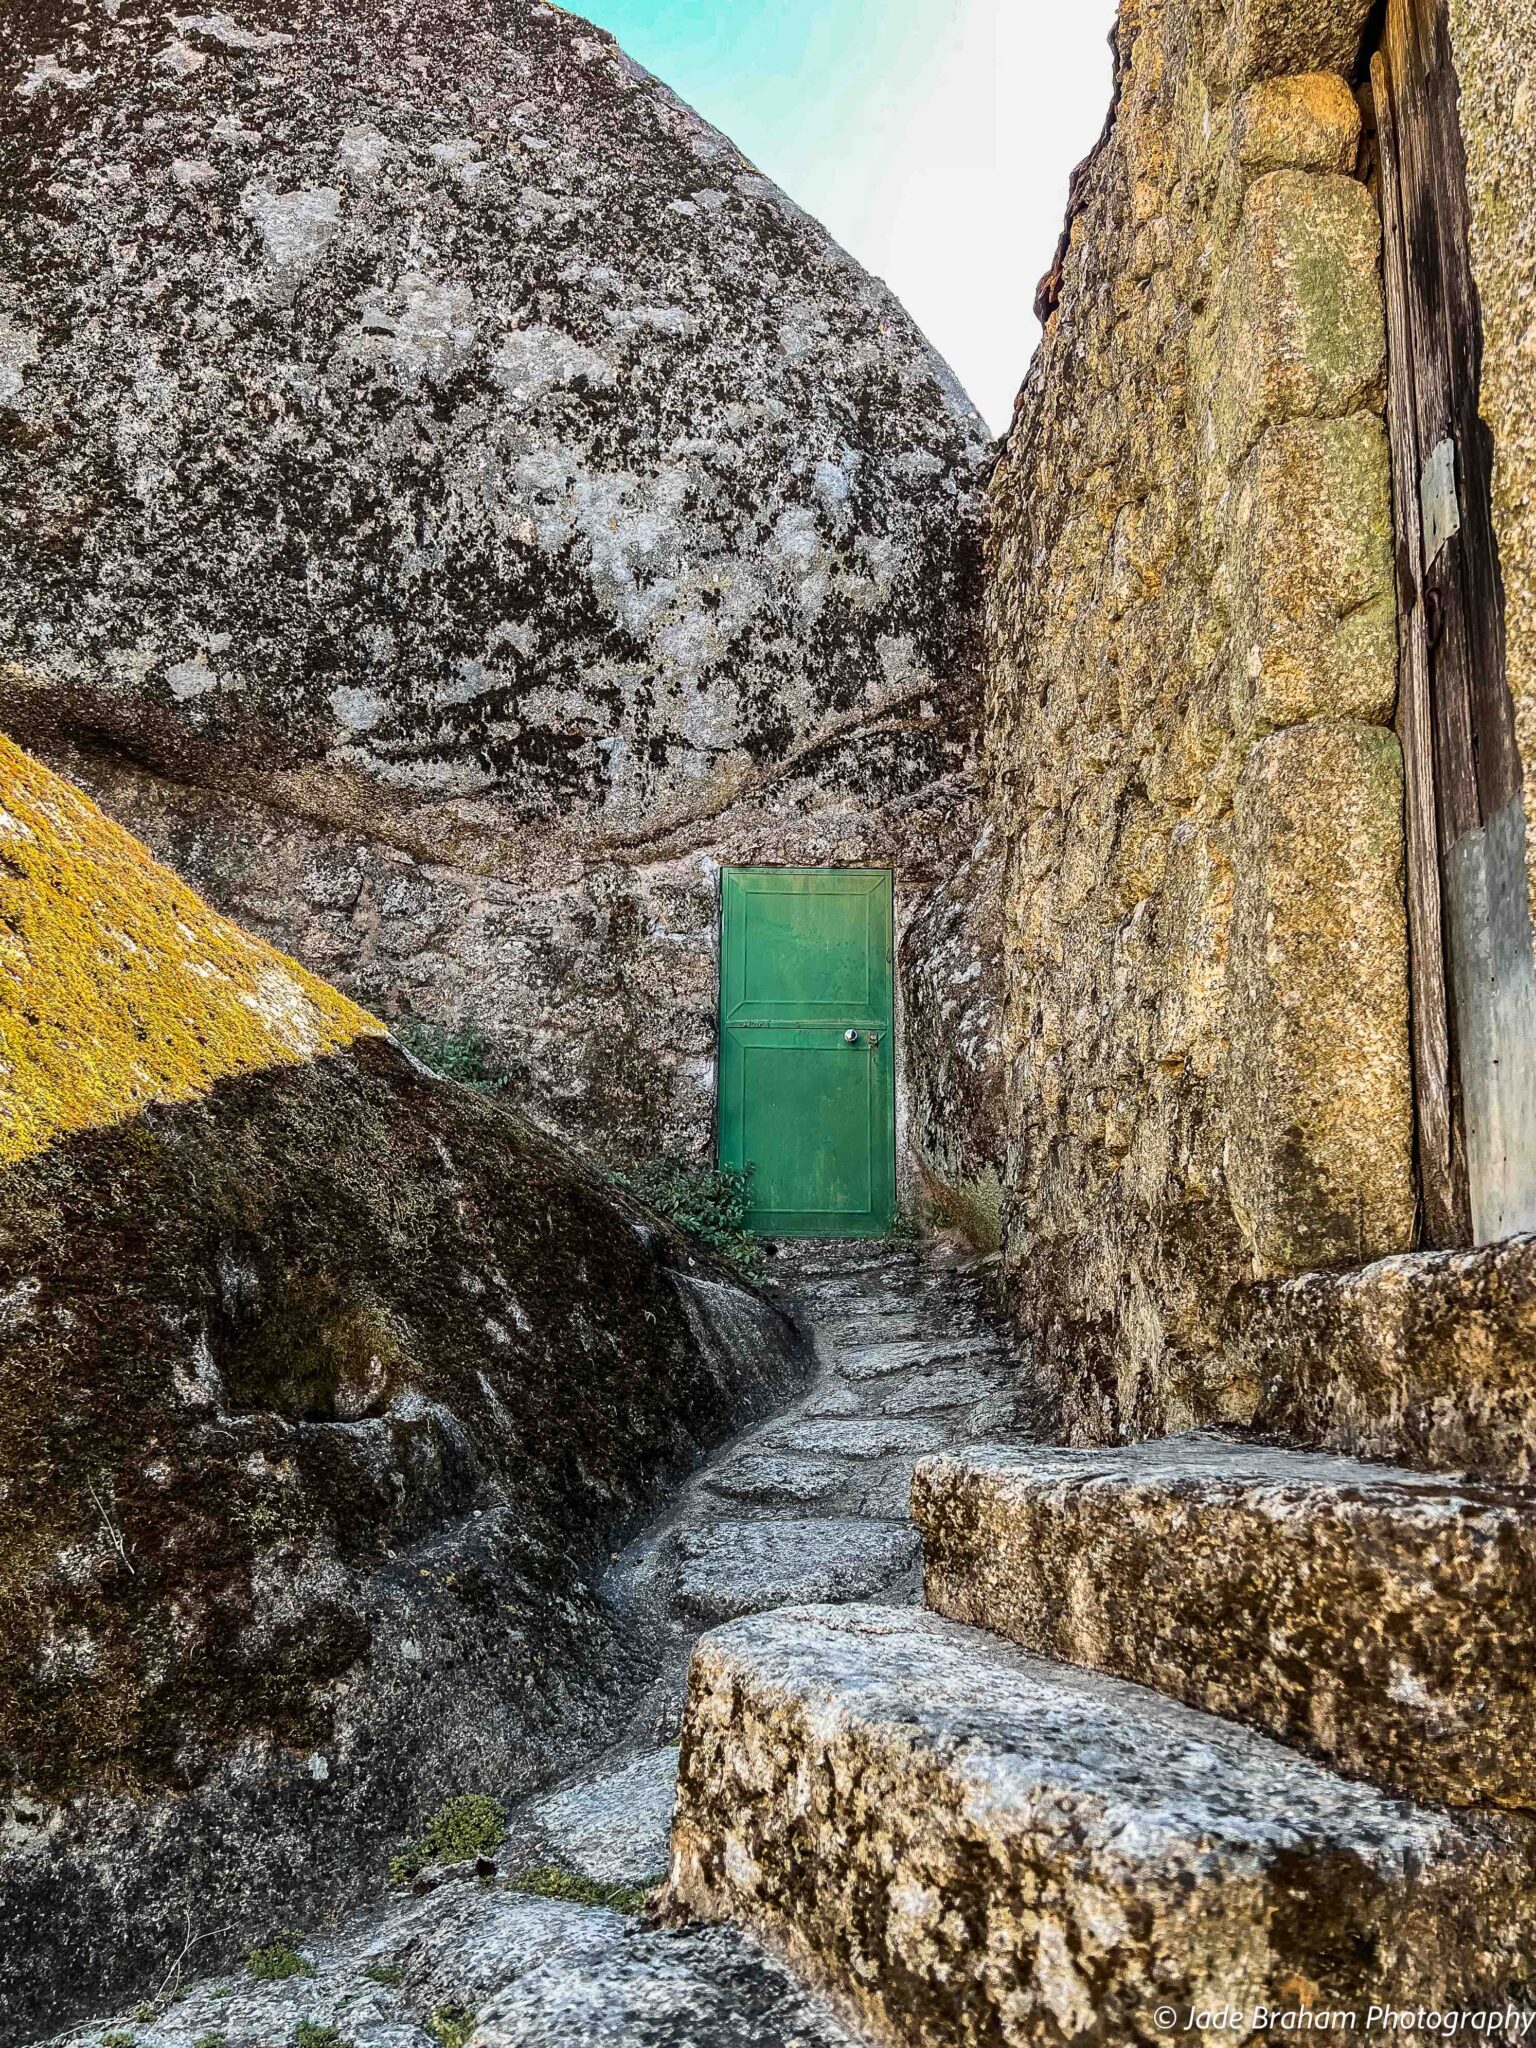 Best Places to Visit in Portugal - Monsanto's houses are built out of granite boulders